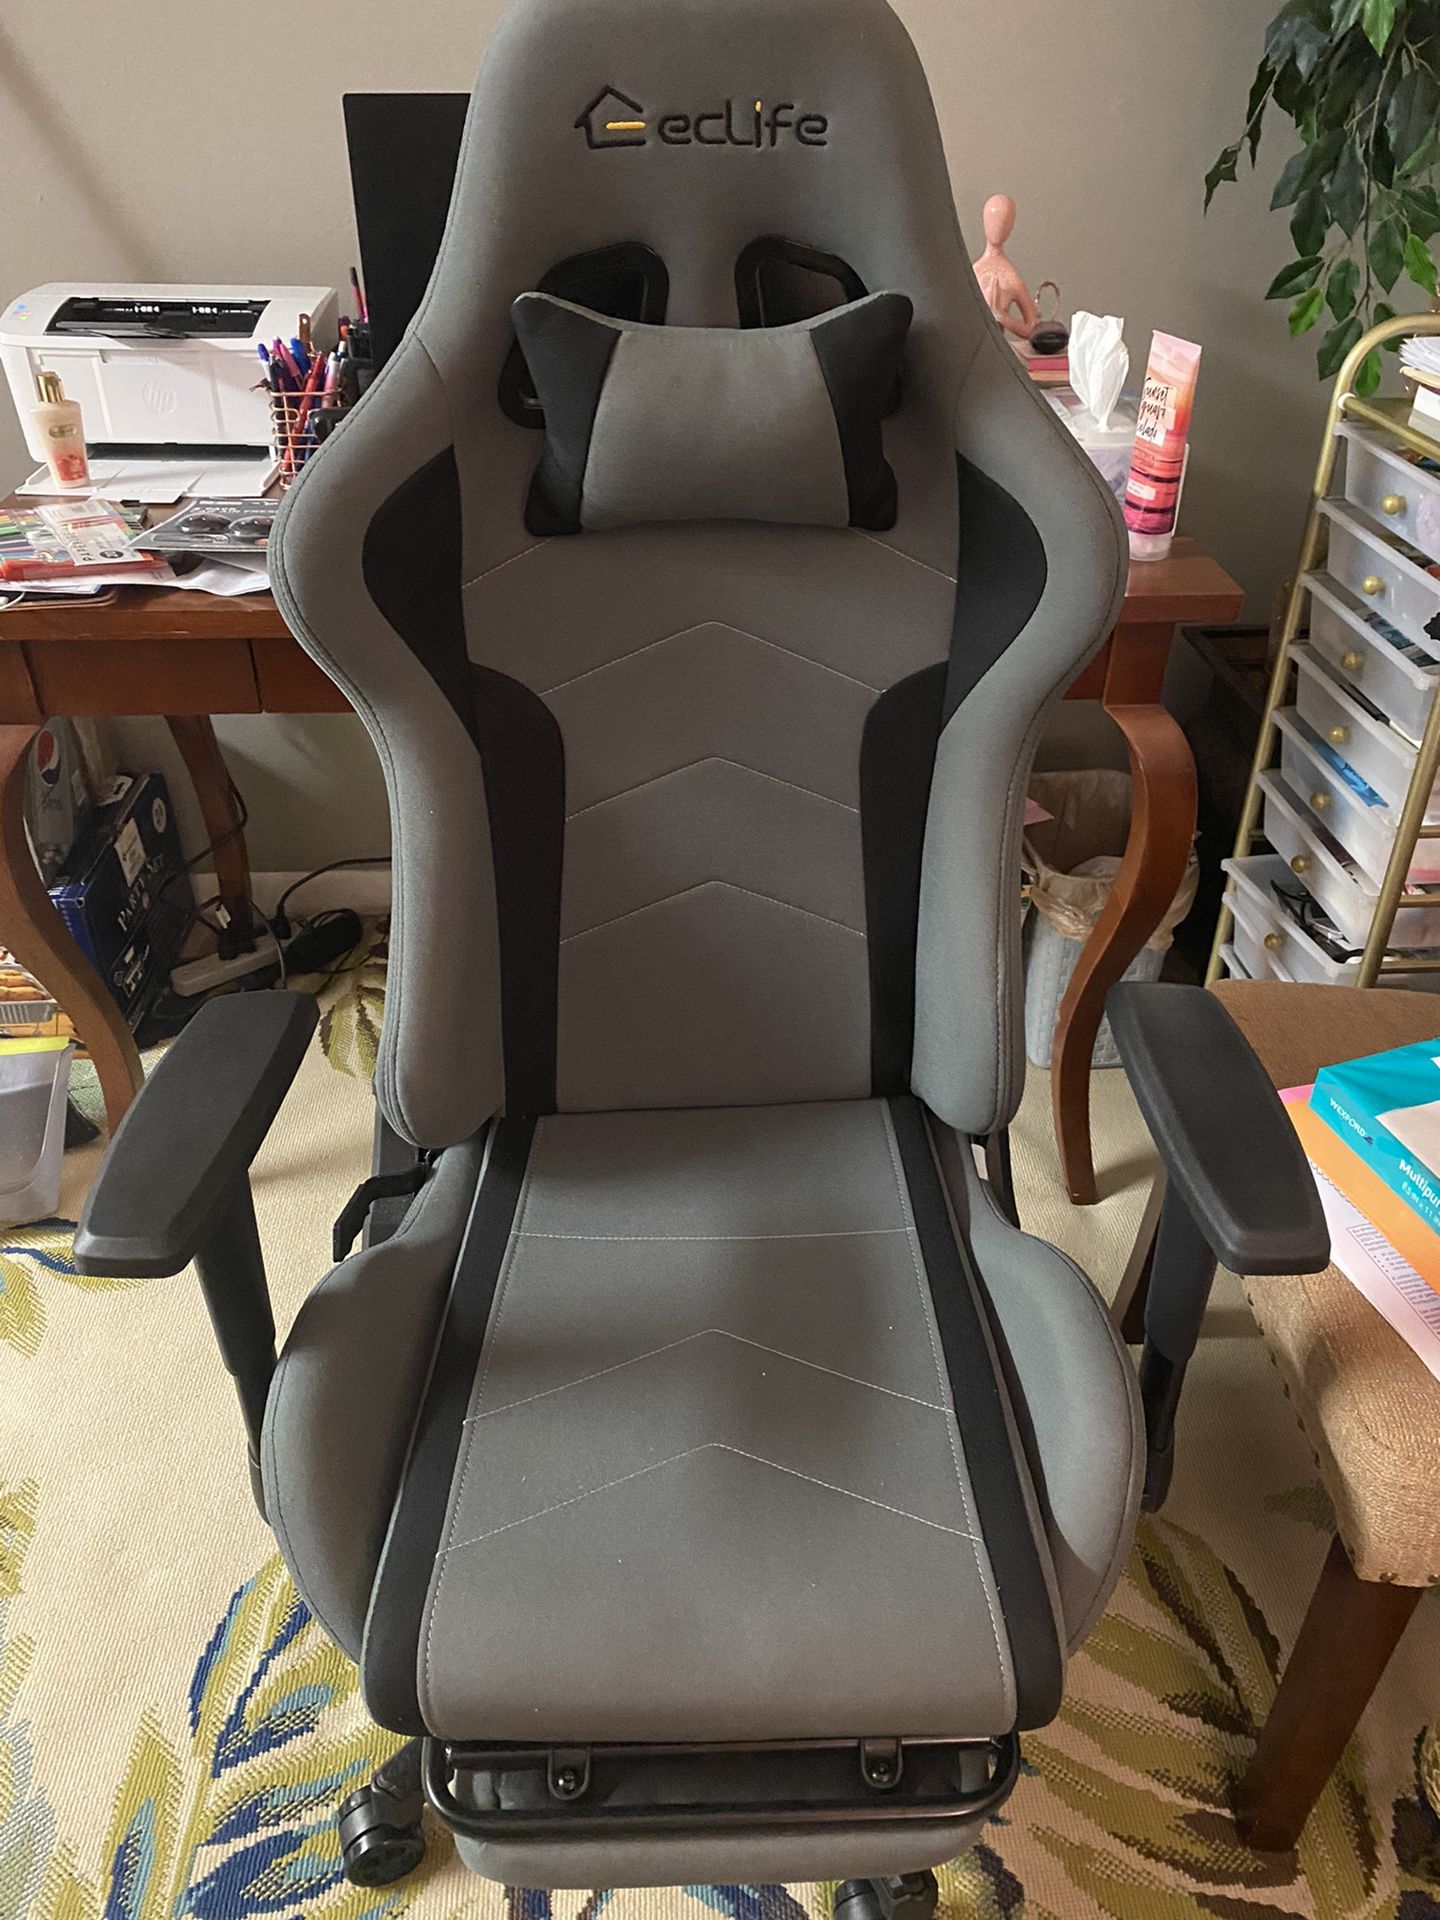 Little used office chair in good condition I am selling because I am leaving the city